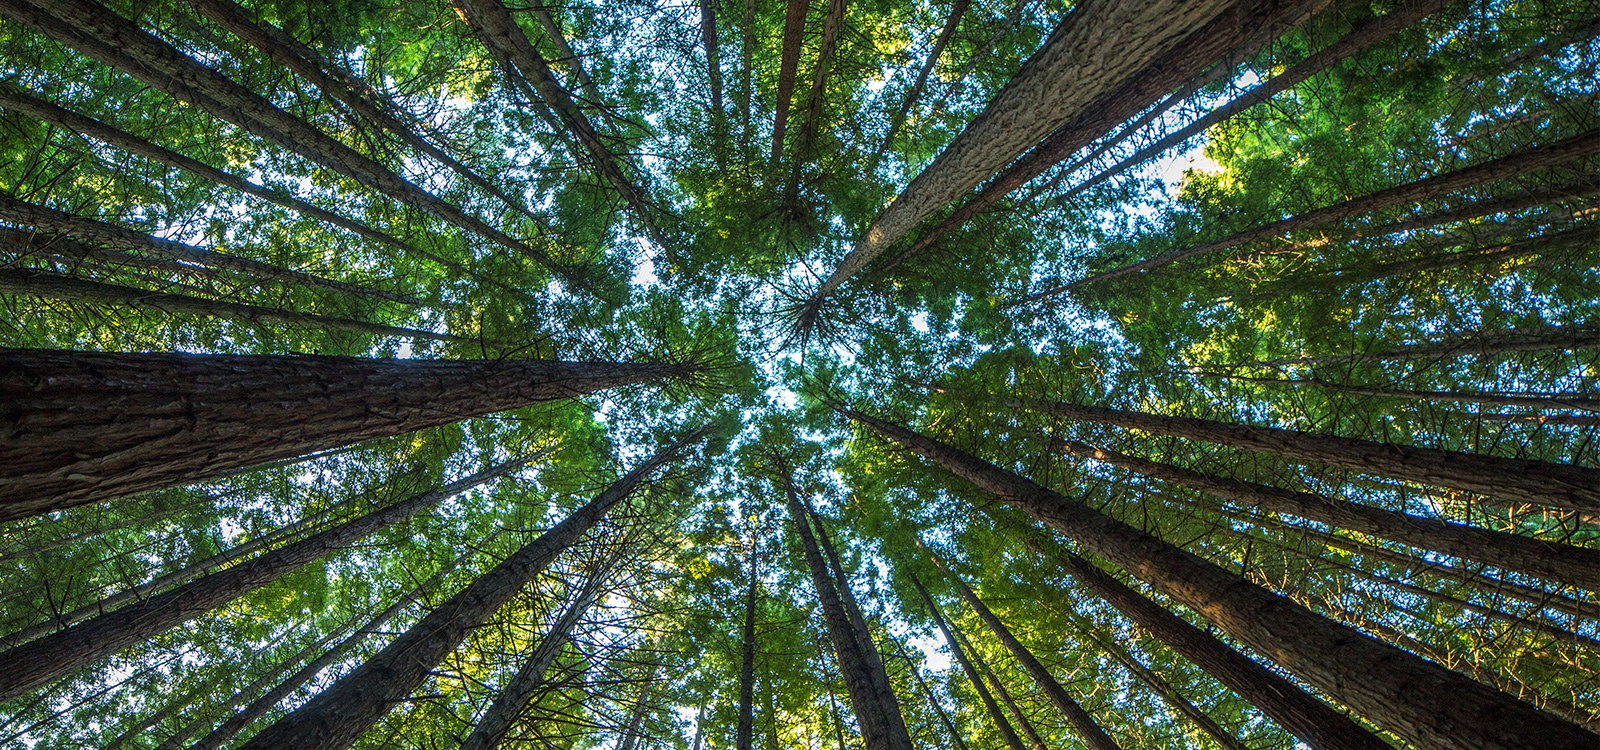 View of pine trees from the ground looking up